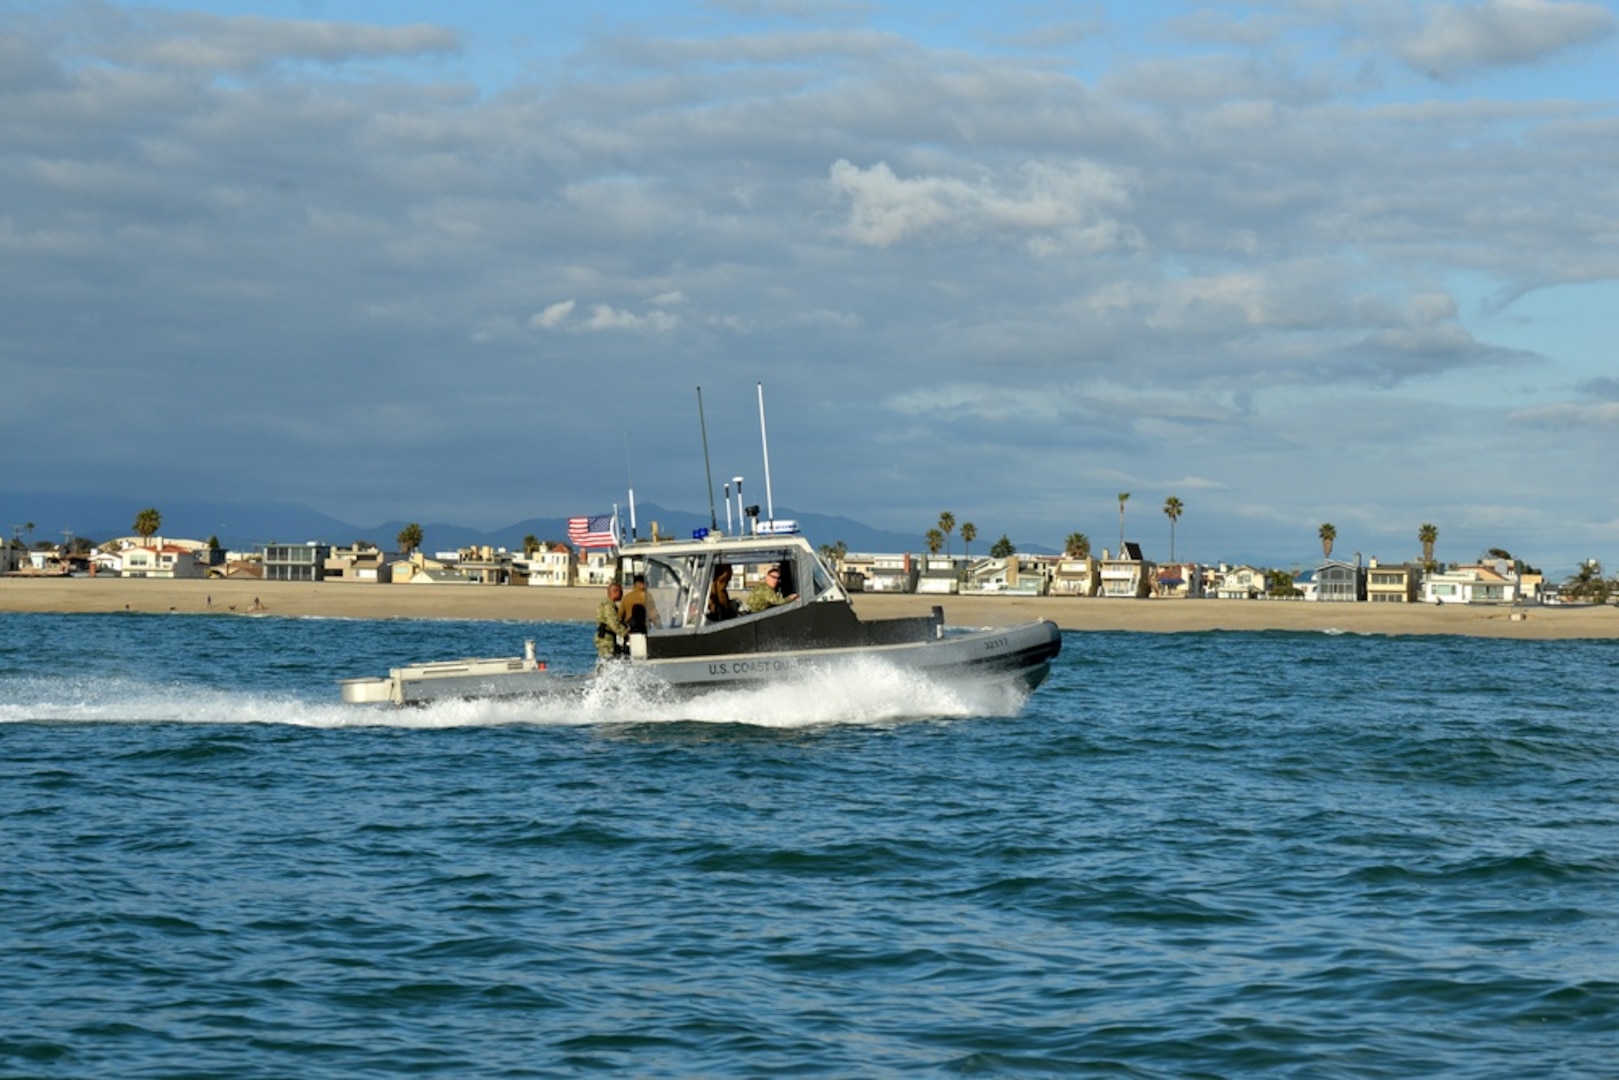 Crewmembers aboard a 32-foot Transportable Port Security Boat from Coast Guard Port Security Unit 312 patrol waterways near Port Hueneme, California, in support of Exercise Pacific Blitz 2019 (PacBlitz19), March 4, 2019. The San Francisco-based Port Security Unit deployed for PacBlitz19 which tested interoperability between the armed services and increased maritime readiness preparing service members for real-world crisis situations and global responses. (U.S. Coast Guard photo by Petty Officer 1st Class Matthew S. Masaschi).